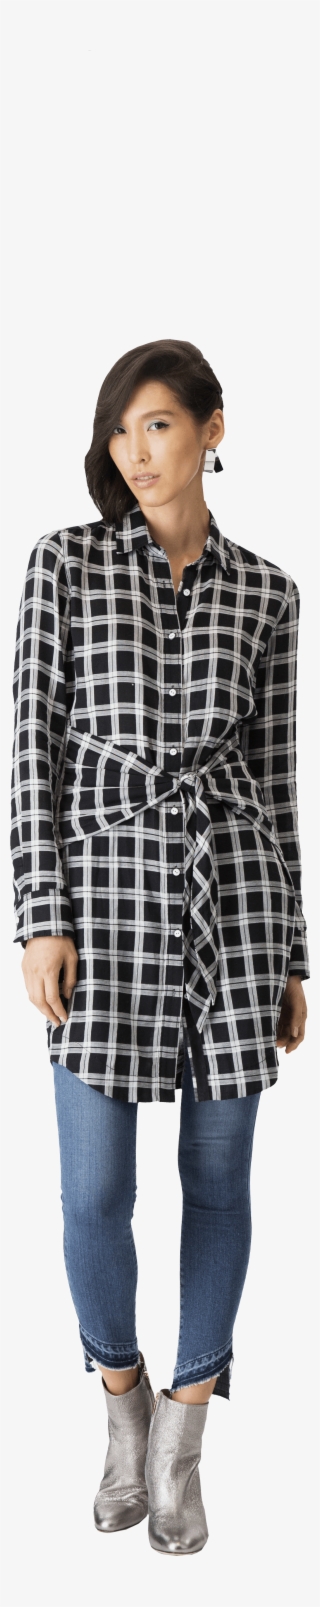 And Bloomingdale's Create Shoppable Online Fashion - Plaid